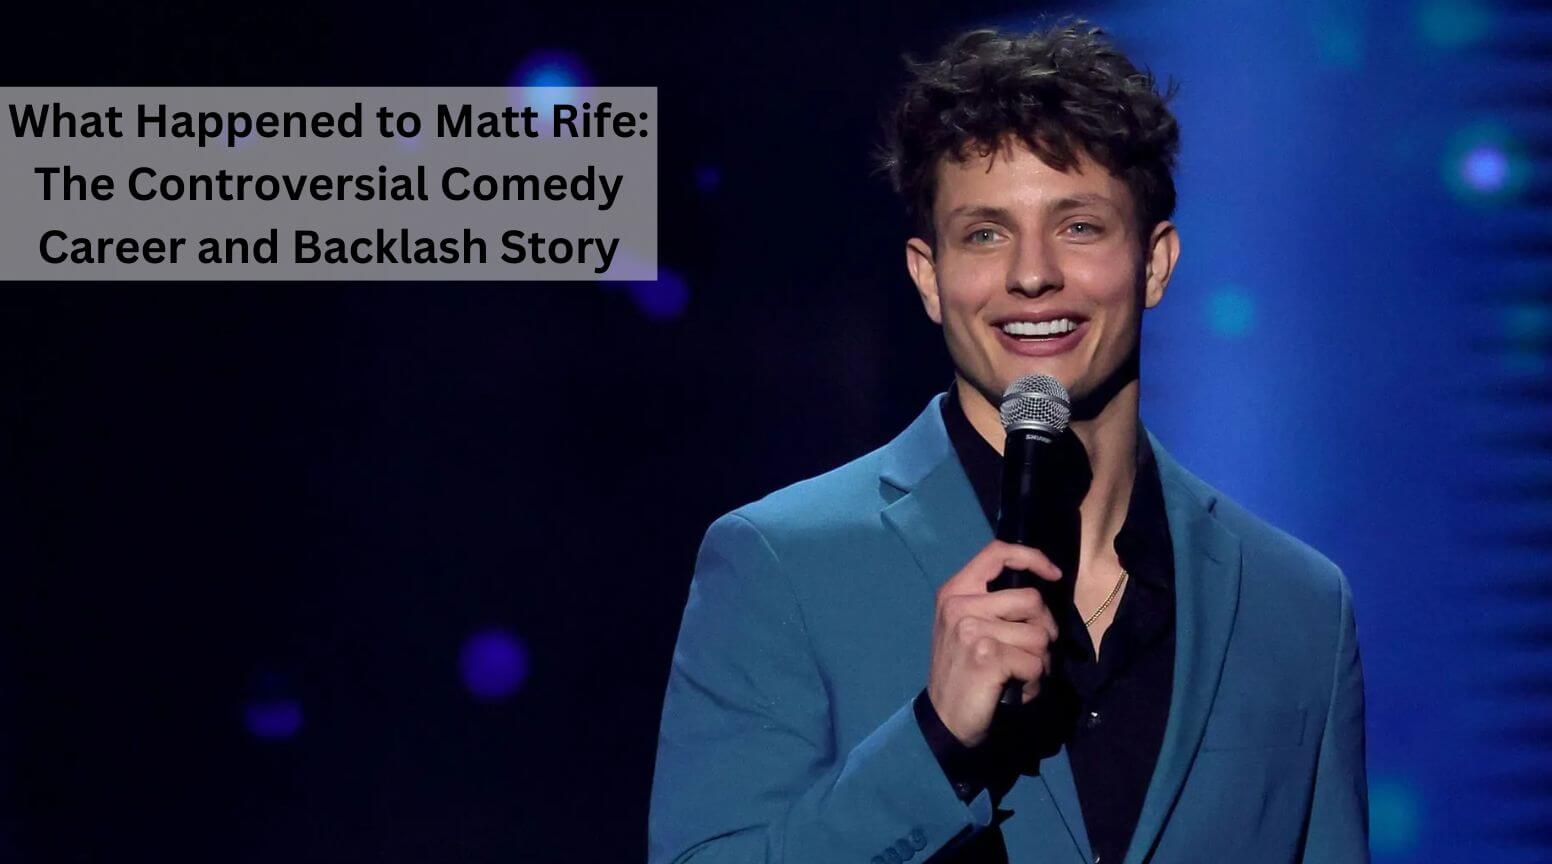 What Happened to Matt Rife: The Controversial Comedy Career and Backlash Story